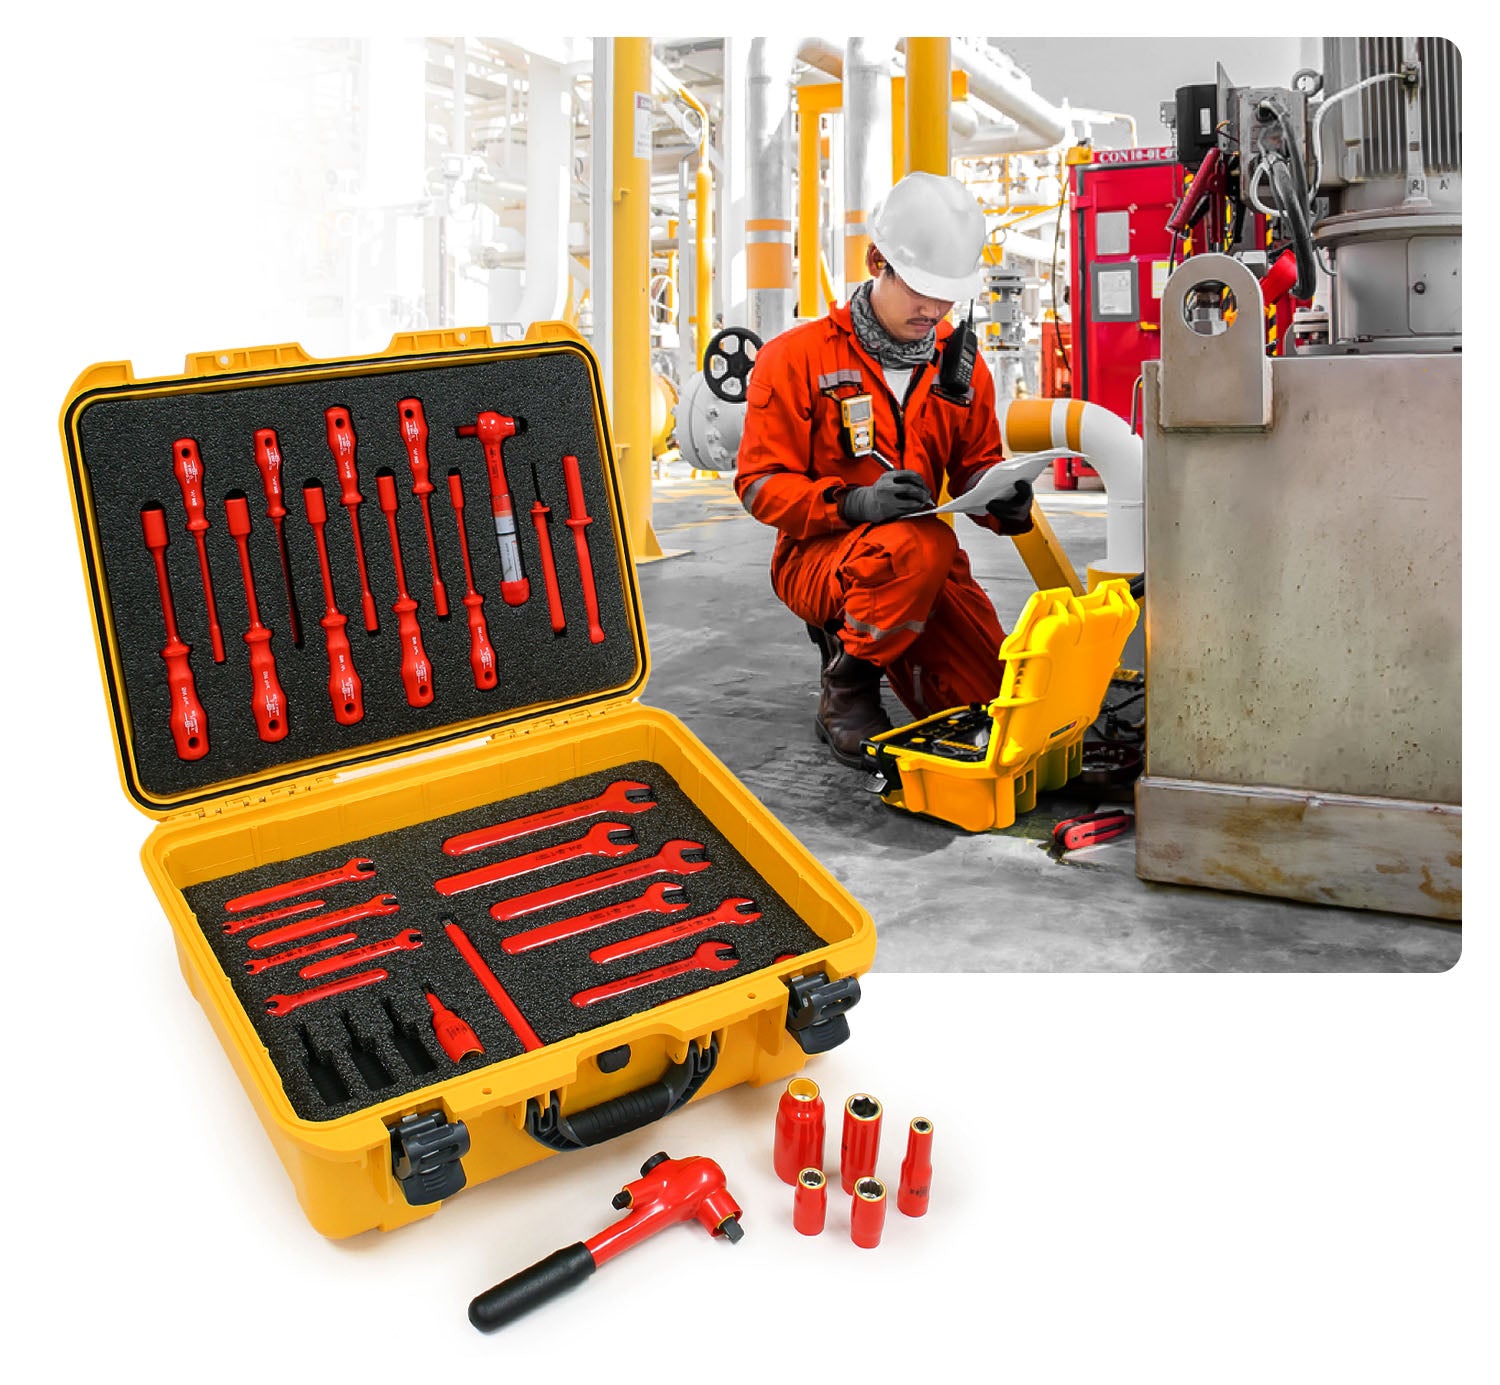 With NANUK hard cases, tools and equipment can be efficiently organized, thanks to features like customizable foam inserts, dividers, lid organizers and multiple colors that allow for better visibility and easy identification of contents.